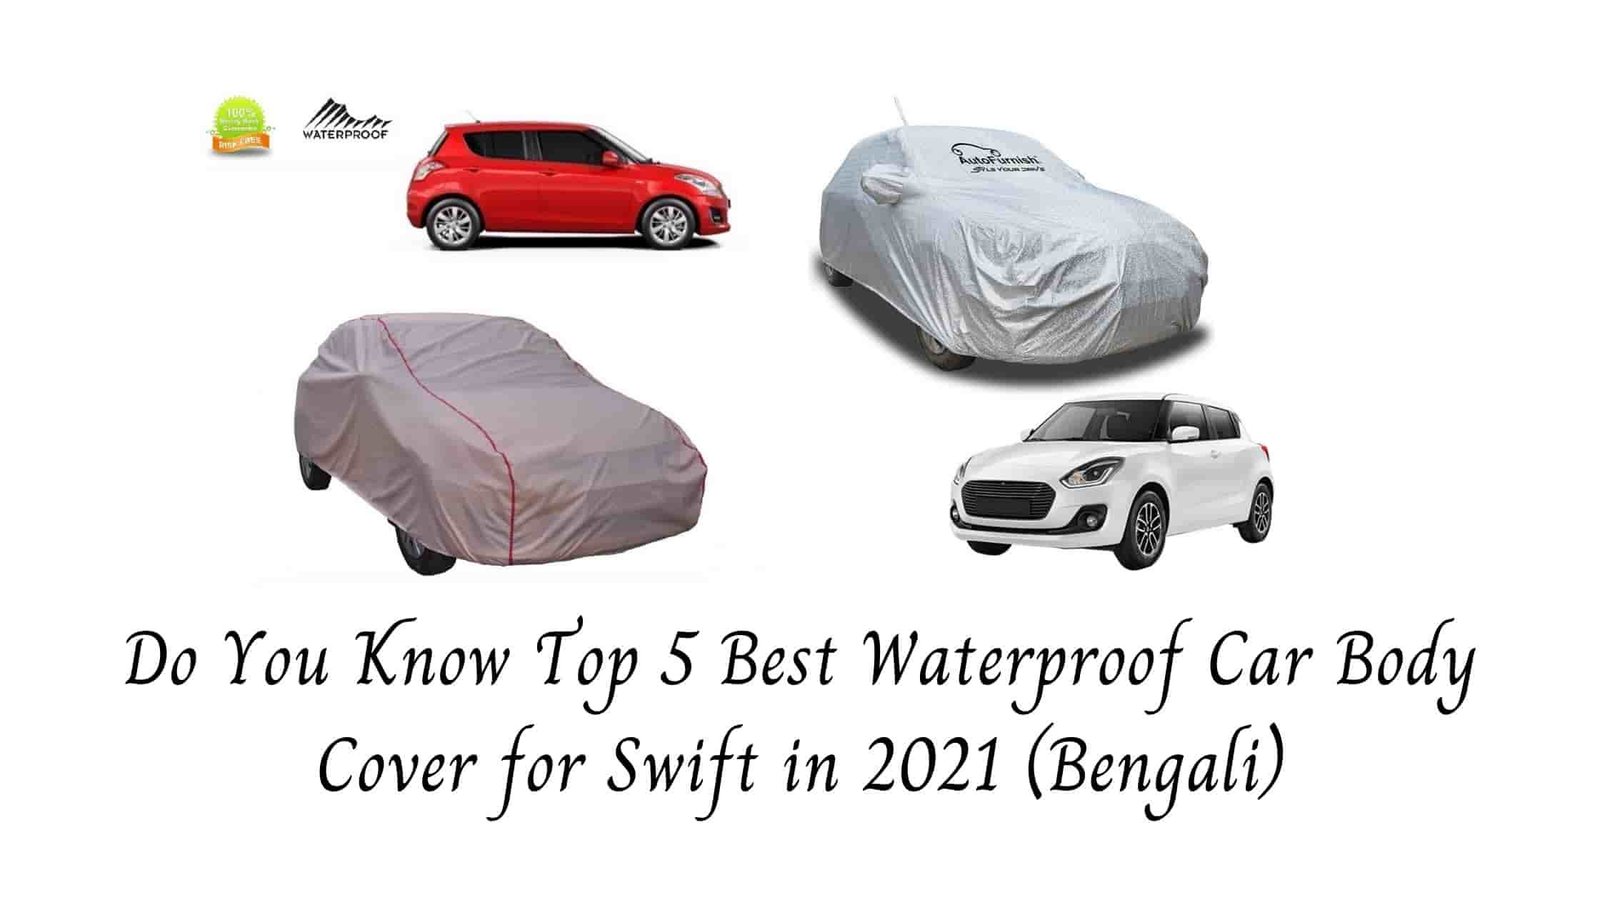 Do You Know Top 5 Best Waterproof Car Body Cover for Swift in 2021 (Bengali)